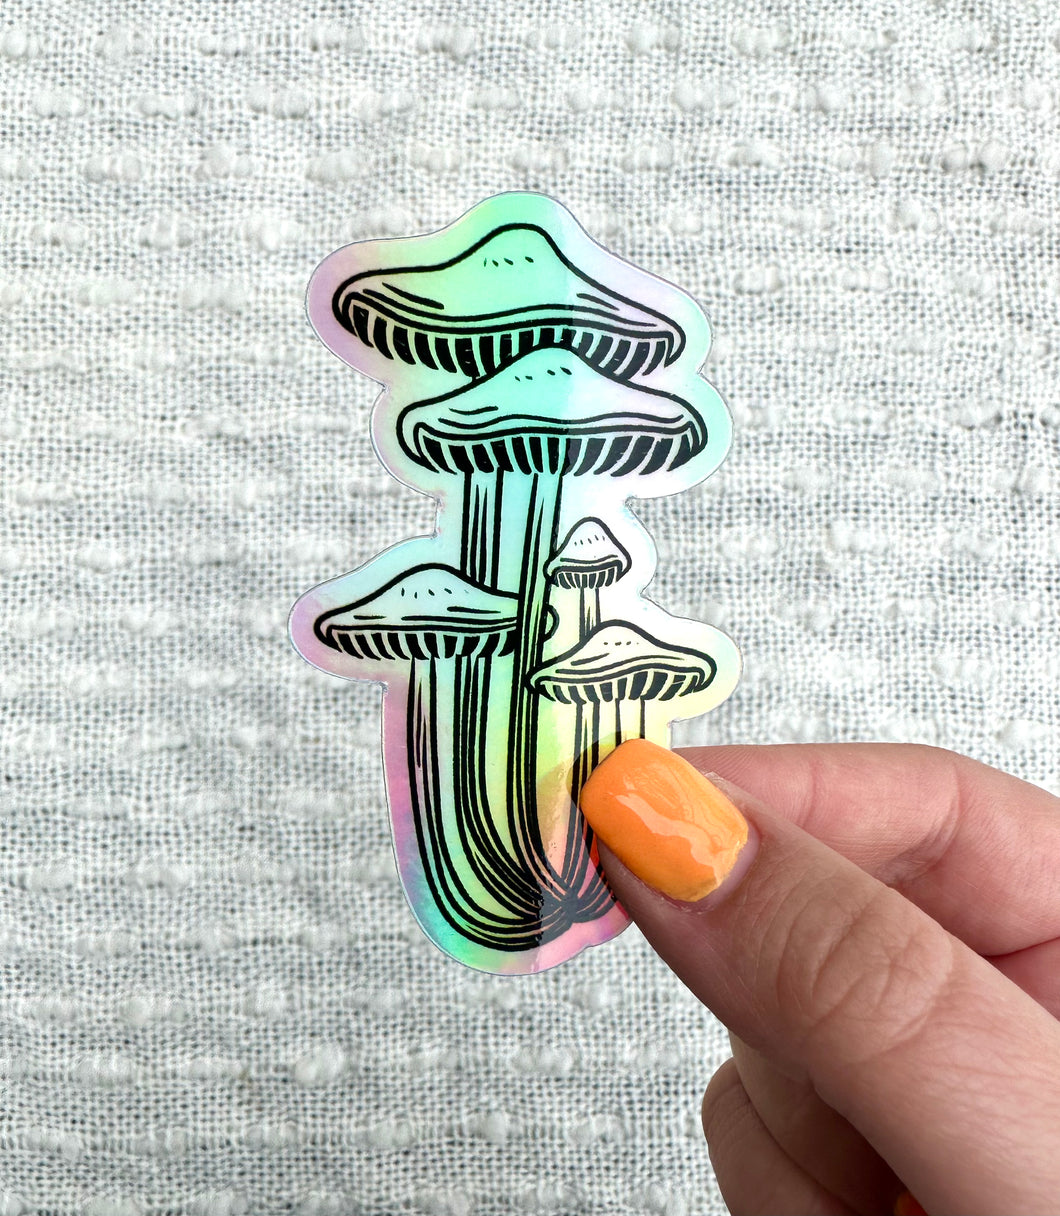 Tall Mushies Holographic Vinyl Sticker, 3.25x2 in.